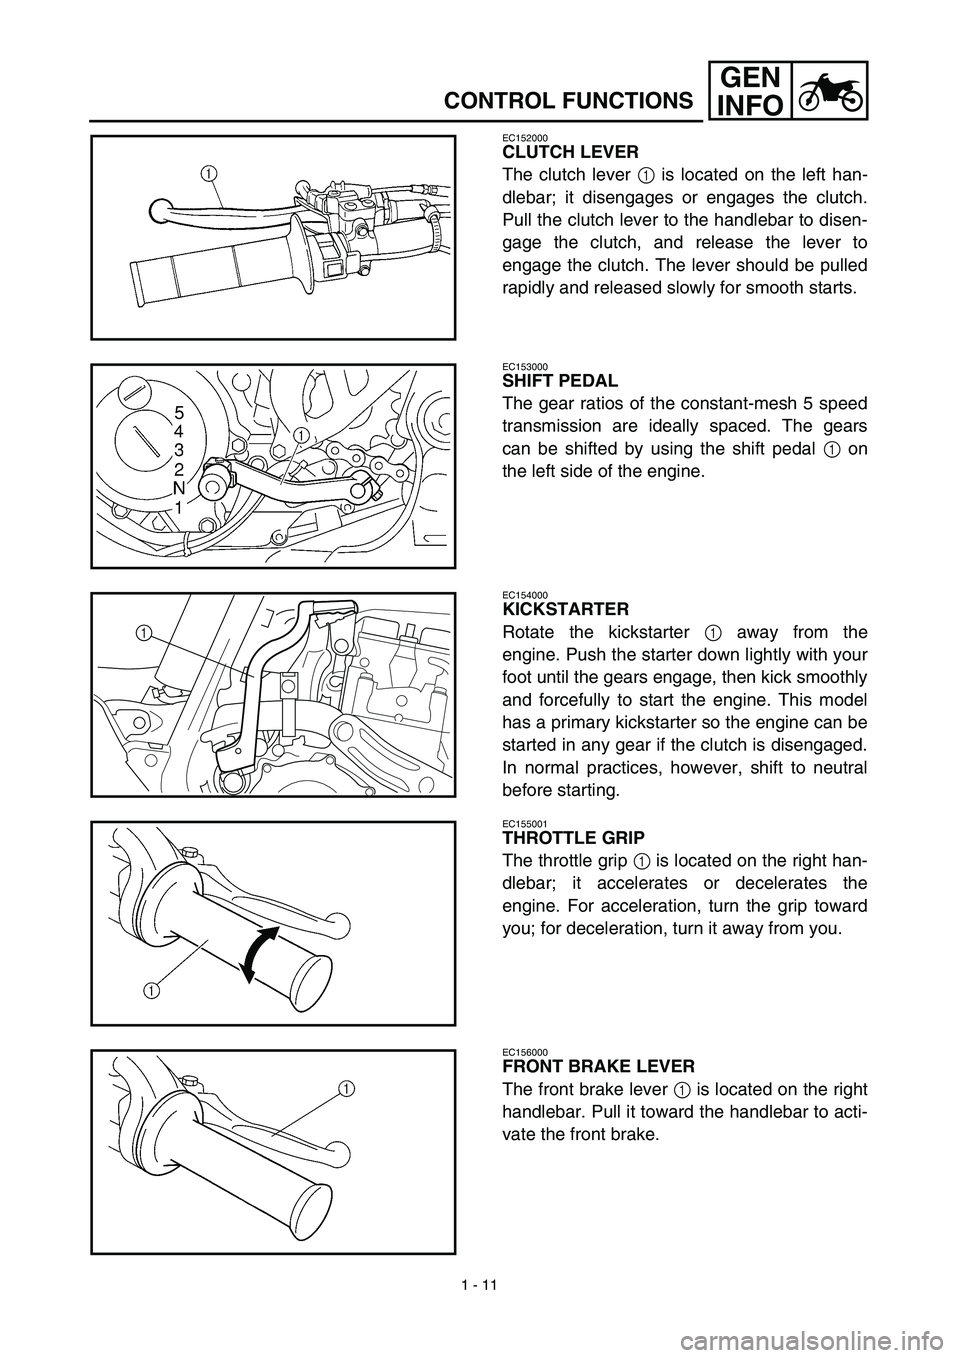 YAMAHA WR 450F 2003  Owners Manual 1 - 11
GEN
INFO
CONTROL FUNCTIONS
EC152000
CLUTCH LEVER
The clutch lever 1 is located on the left han-
dlebar; it disengages or engages the clutch.
Pull the clutch lever to the handlebar to disen-
gag